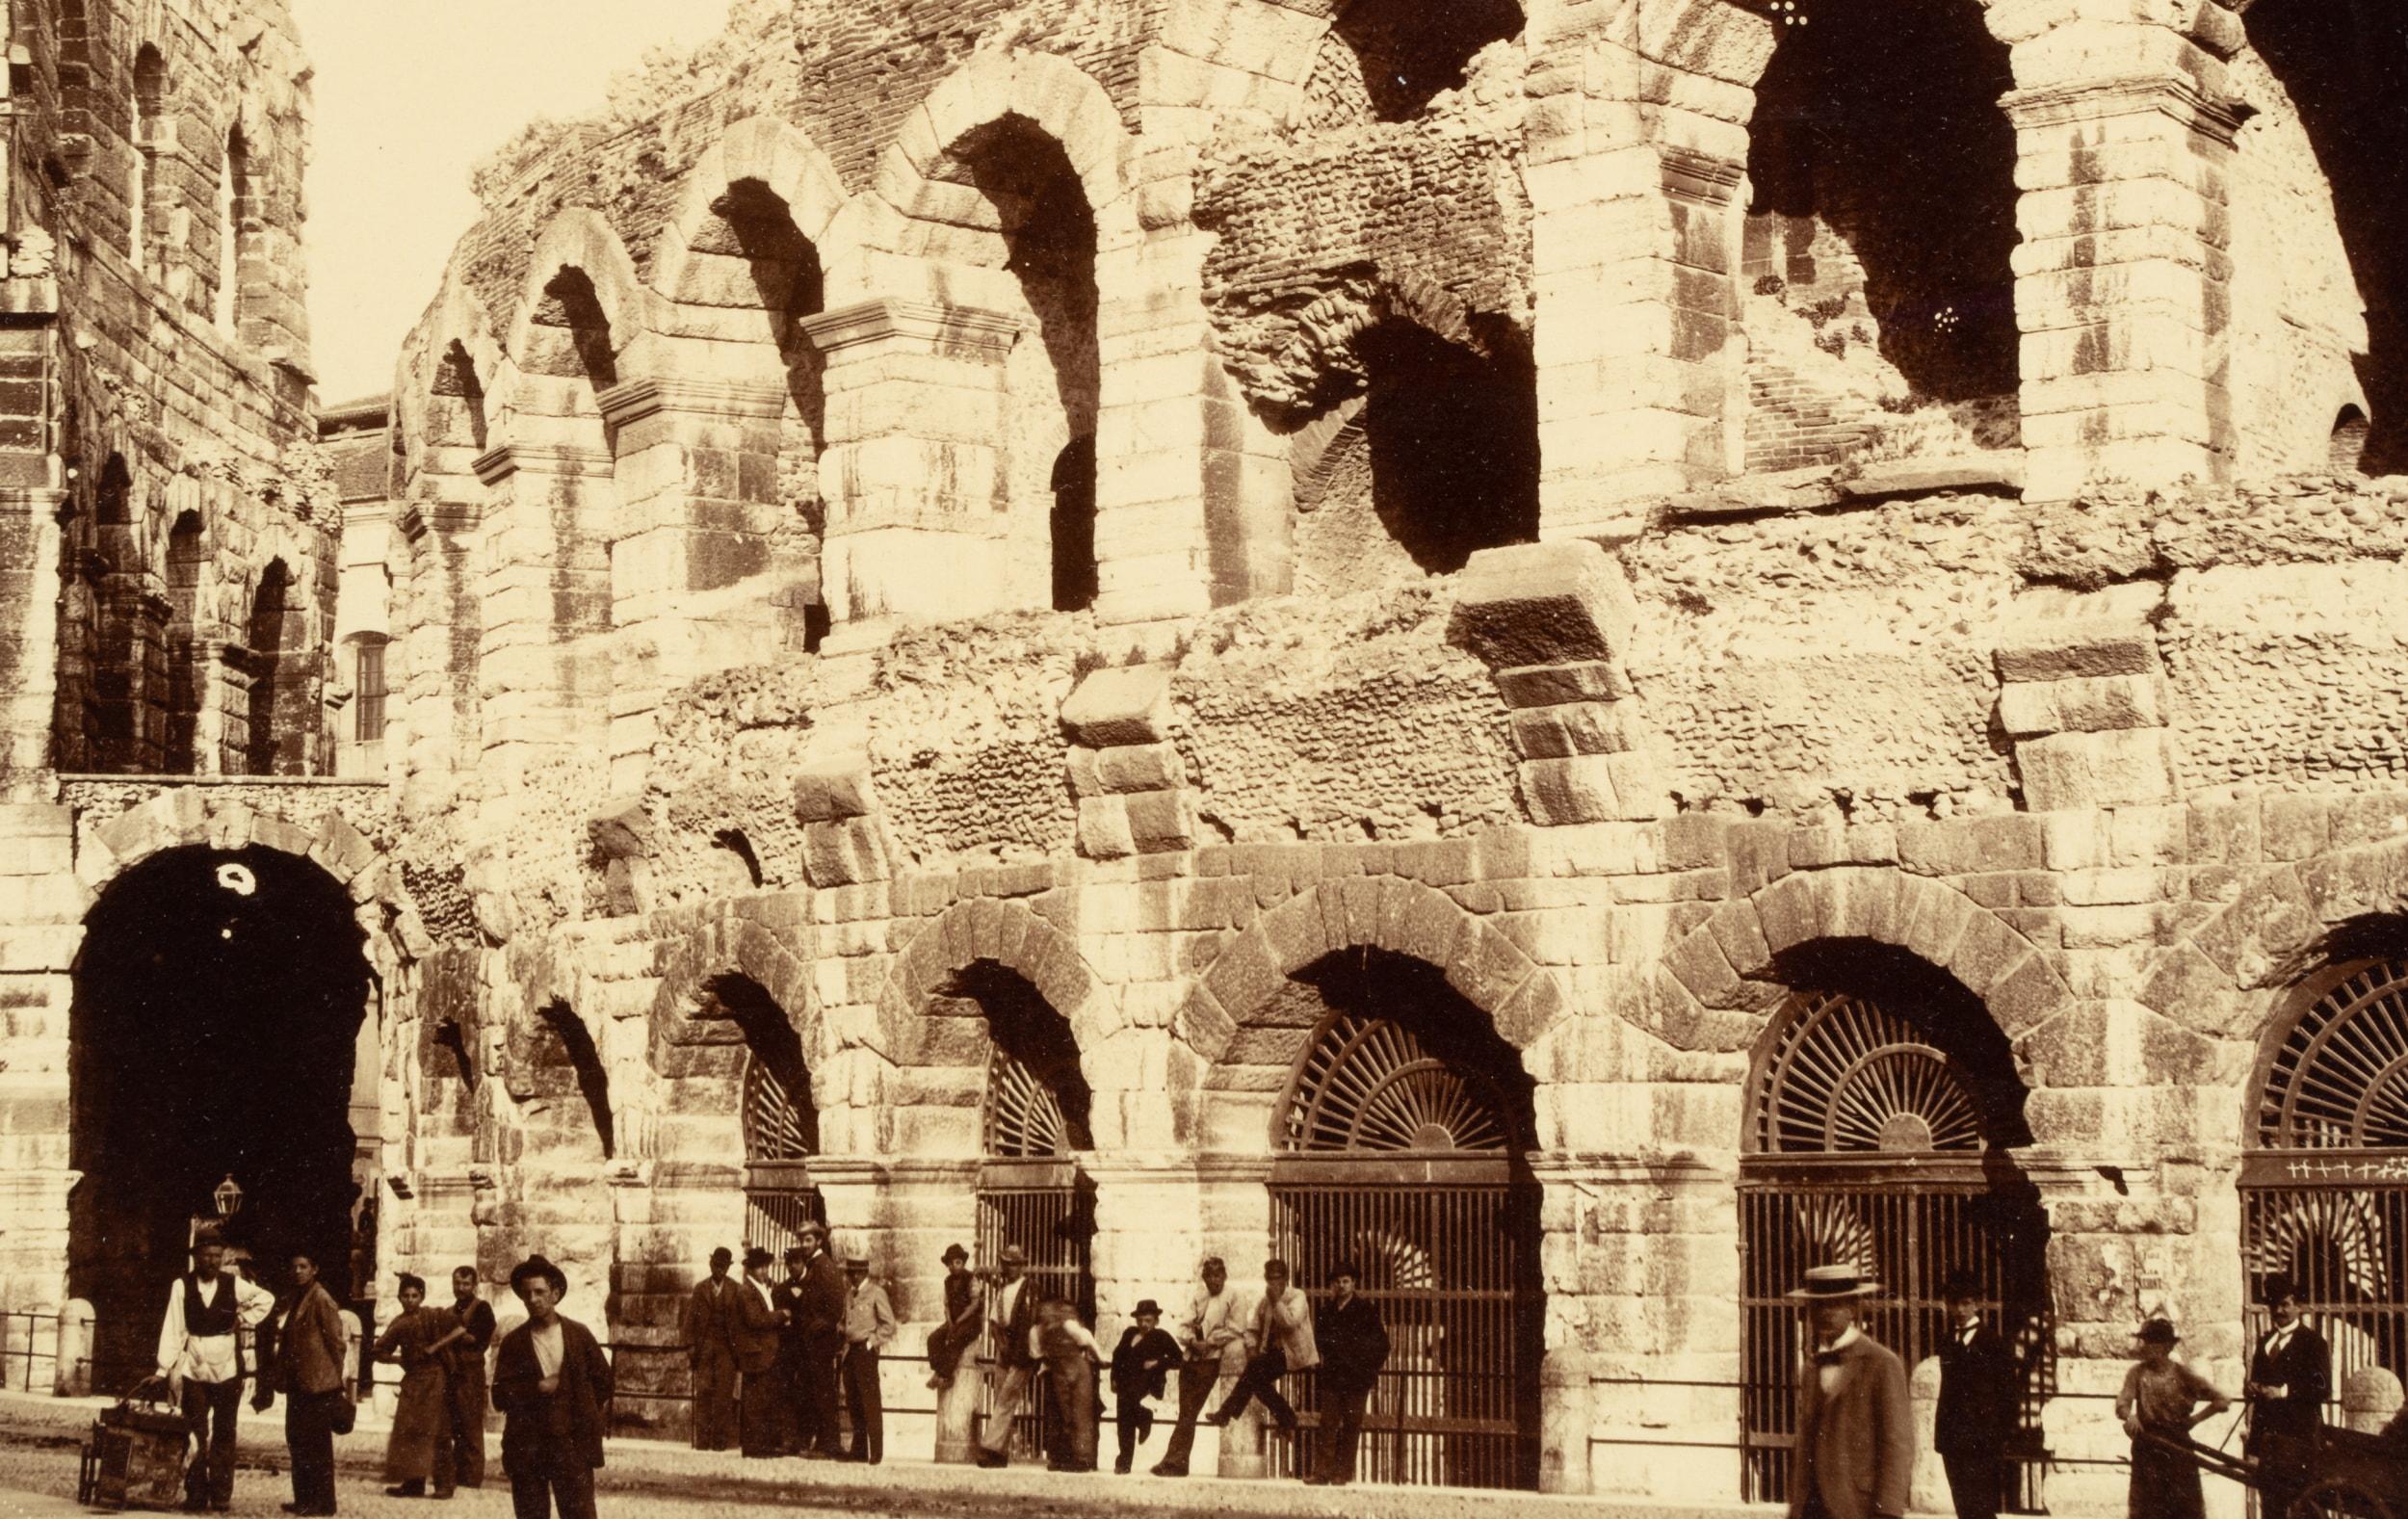 Walls of the Arena of Verona - Photograph by Unknown